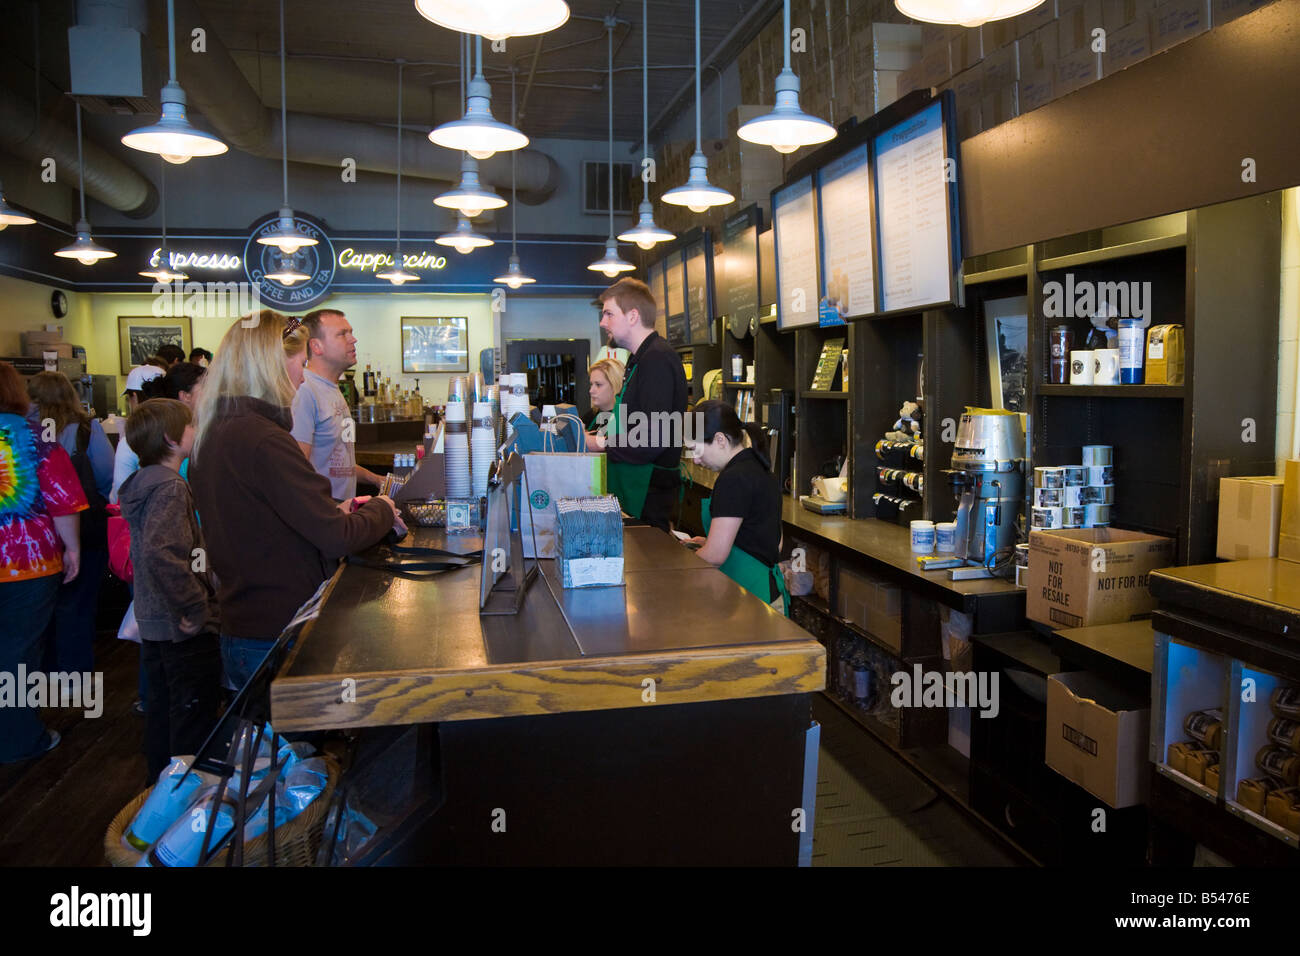  Interior  of the first original Starbucks  coffee shop in 